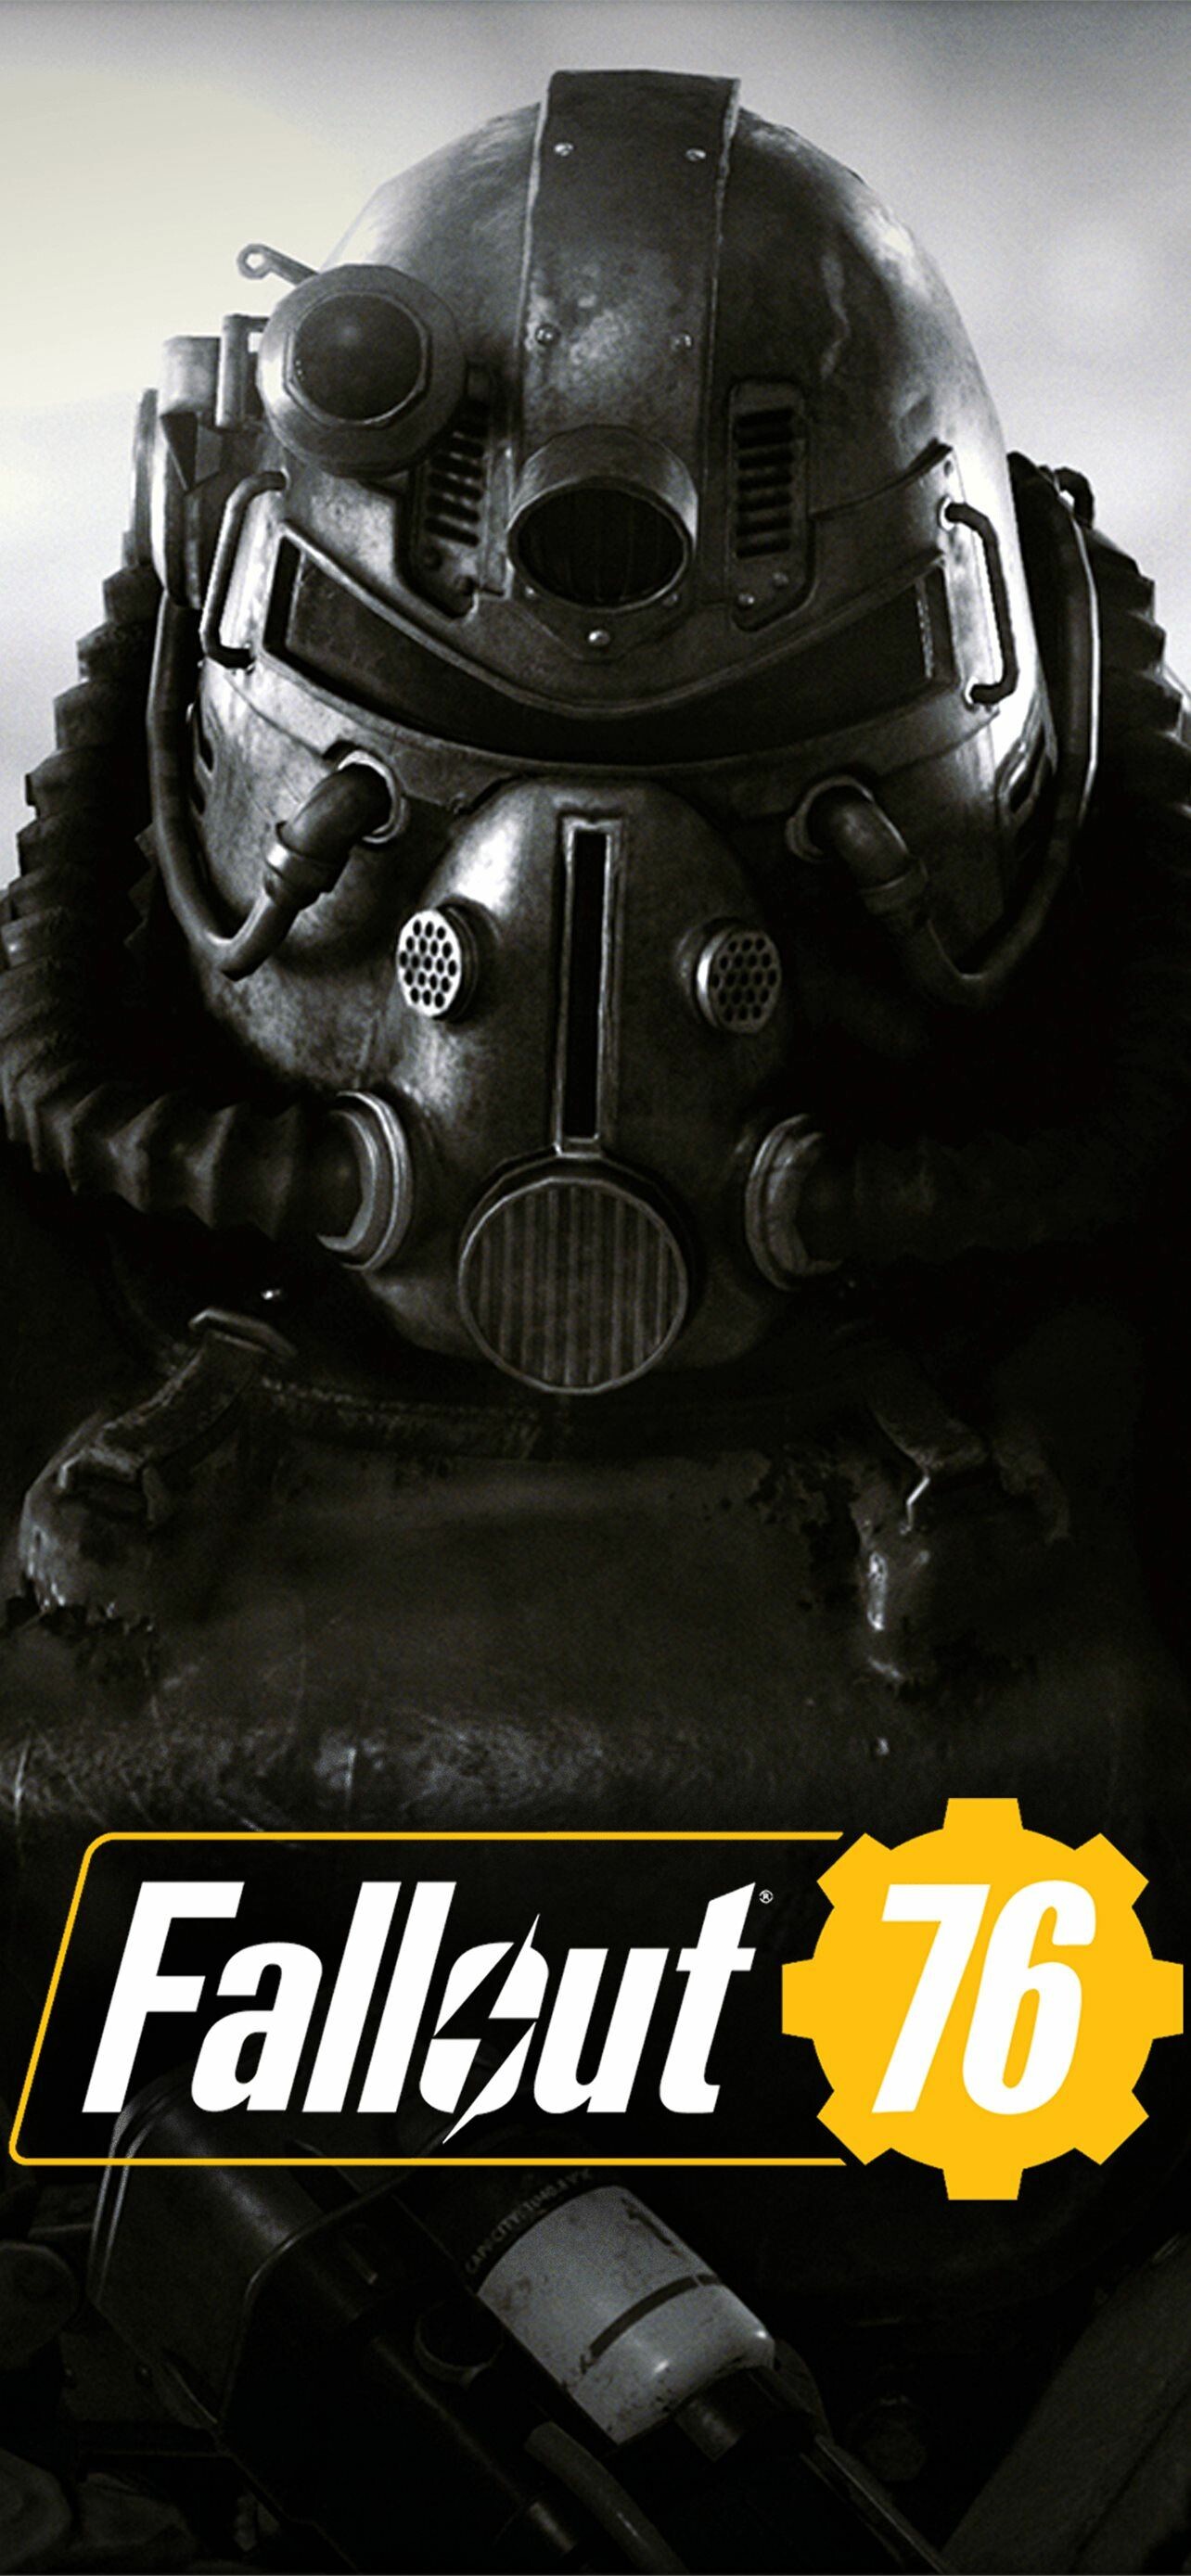 Fallout: The first multiplayer FO game, taking place online in an open world. 1290x2780 HD Wallpaper.